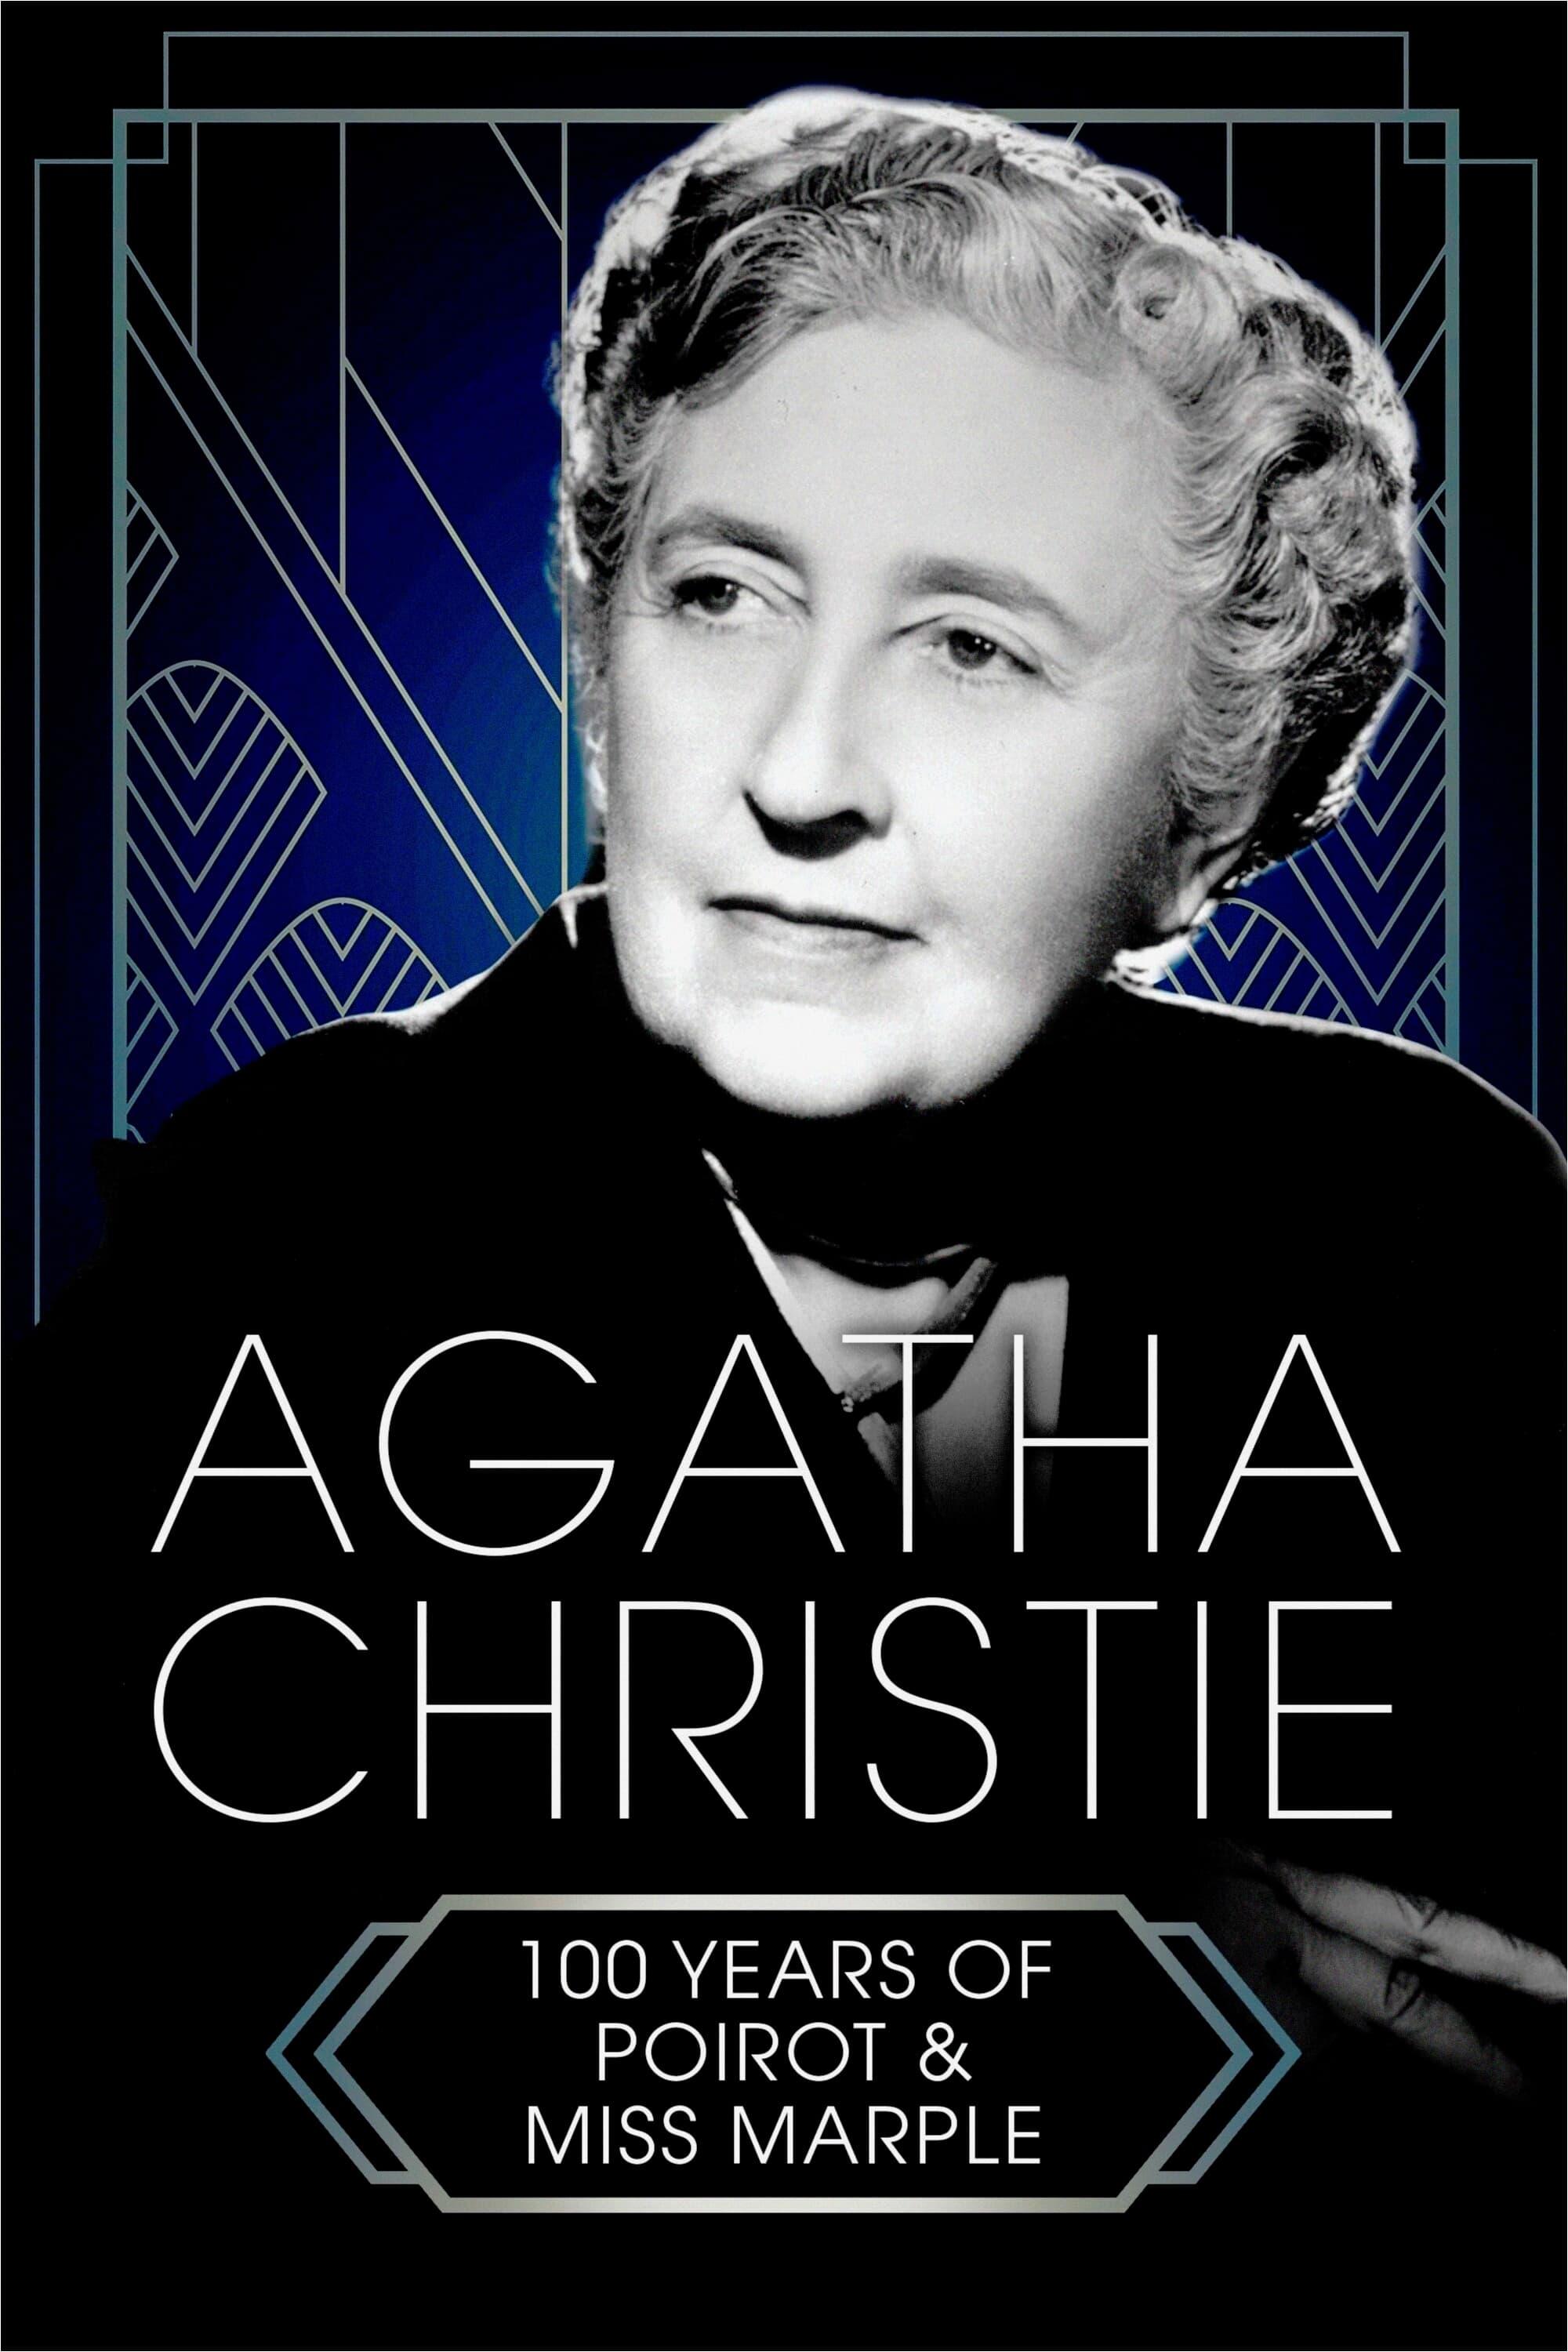 Agatha Christie: 100 Years of Poirot and Miss Marple poster